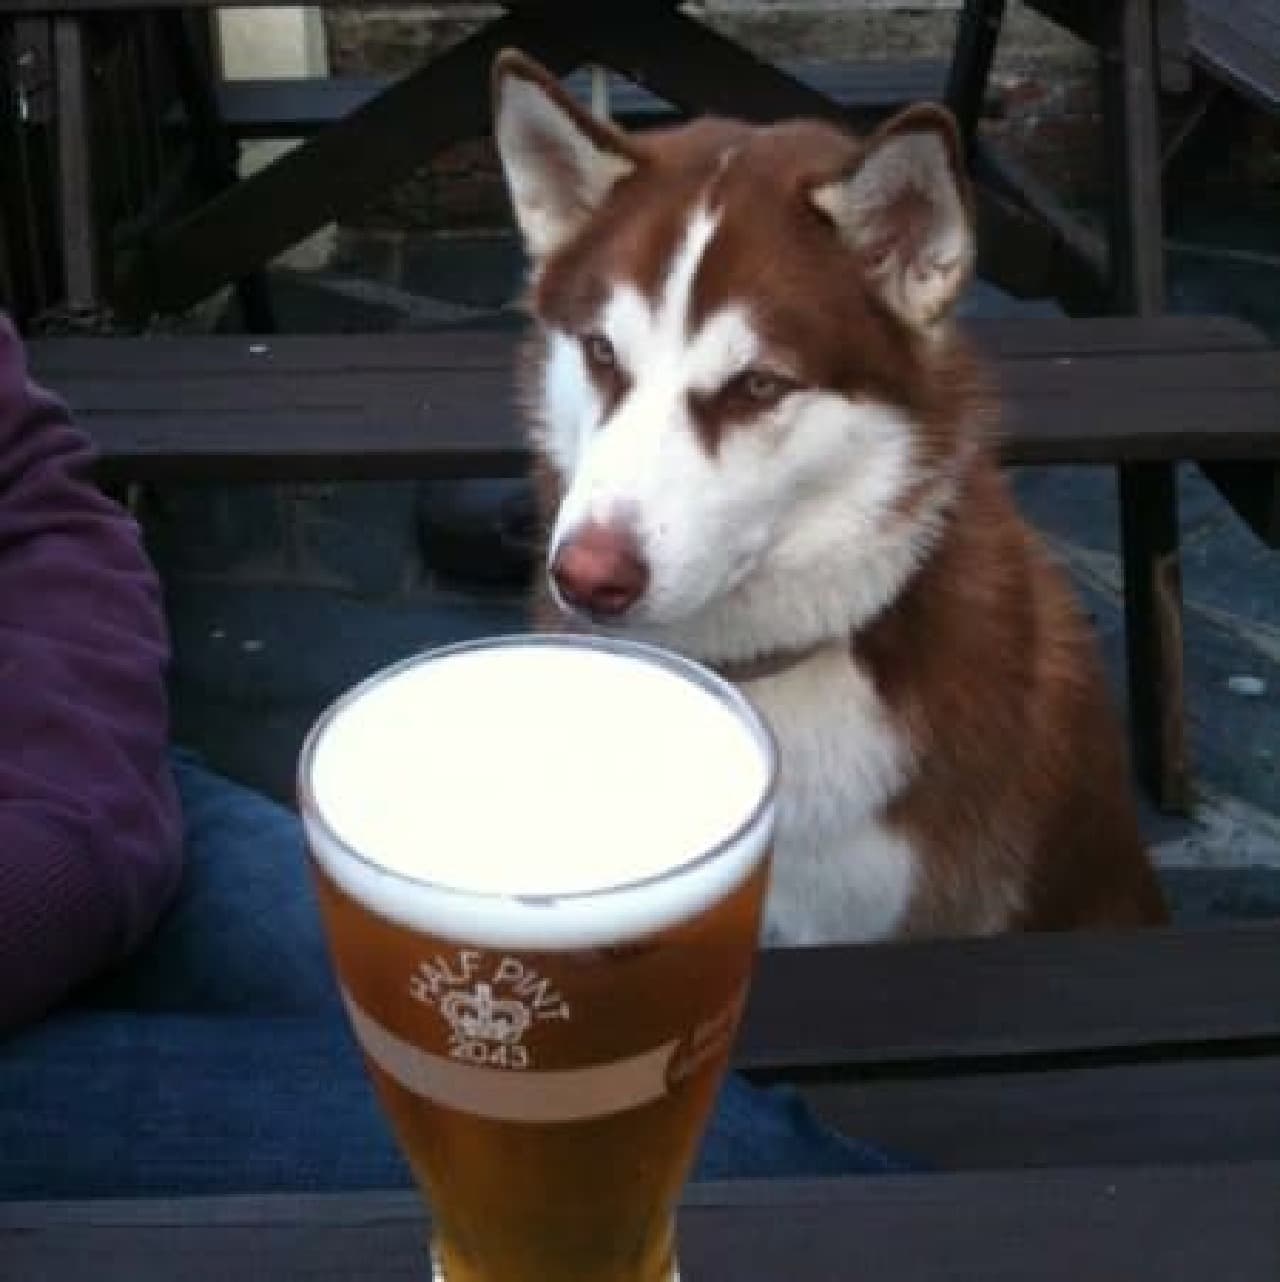 "What is that Shuwashuwa drink ...?" (Source: Dogs in Pubs)